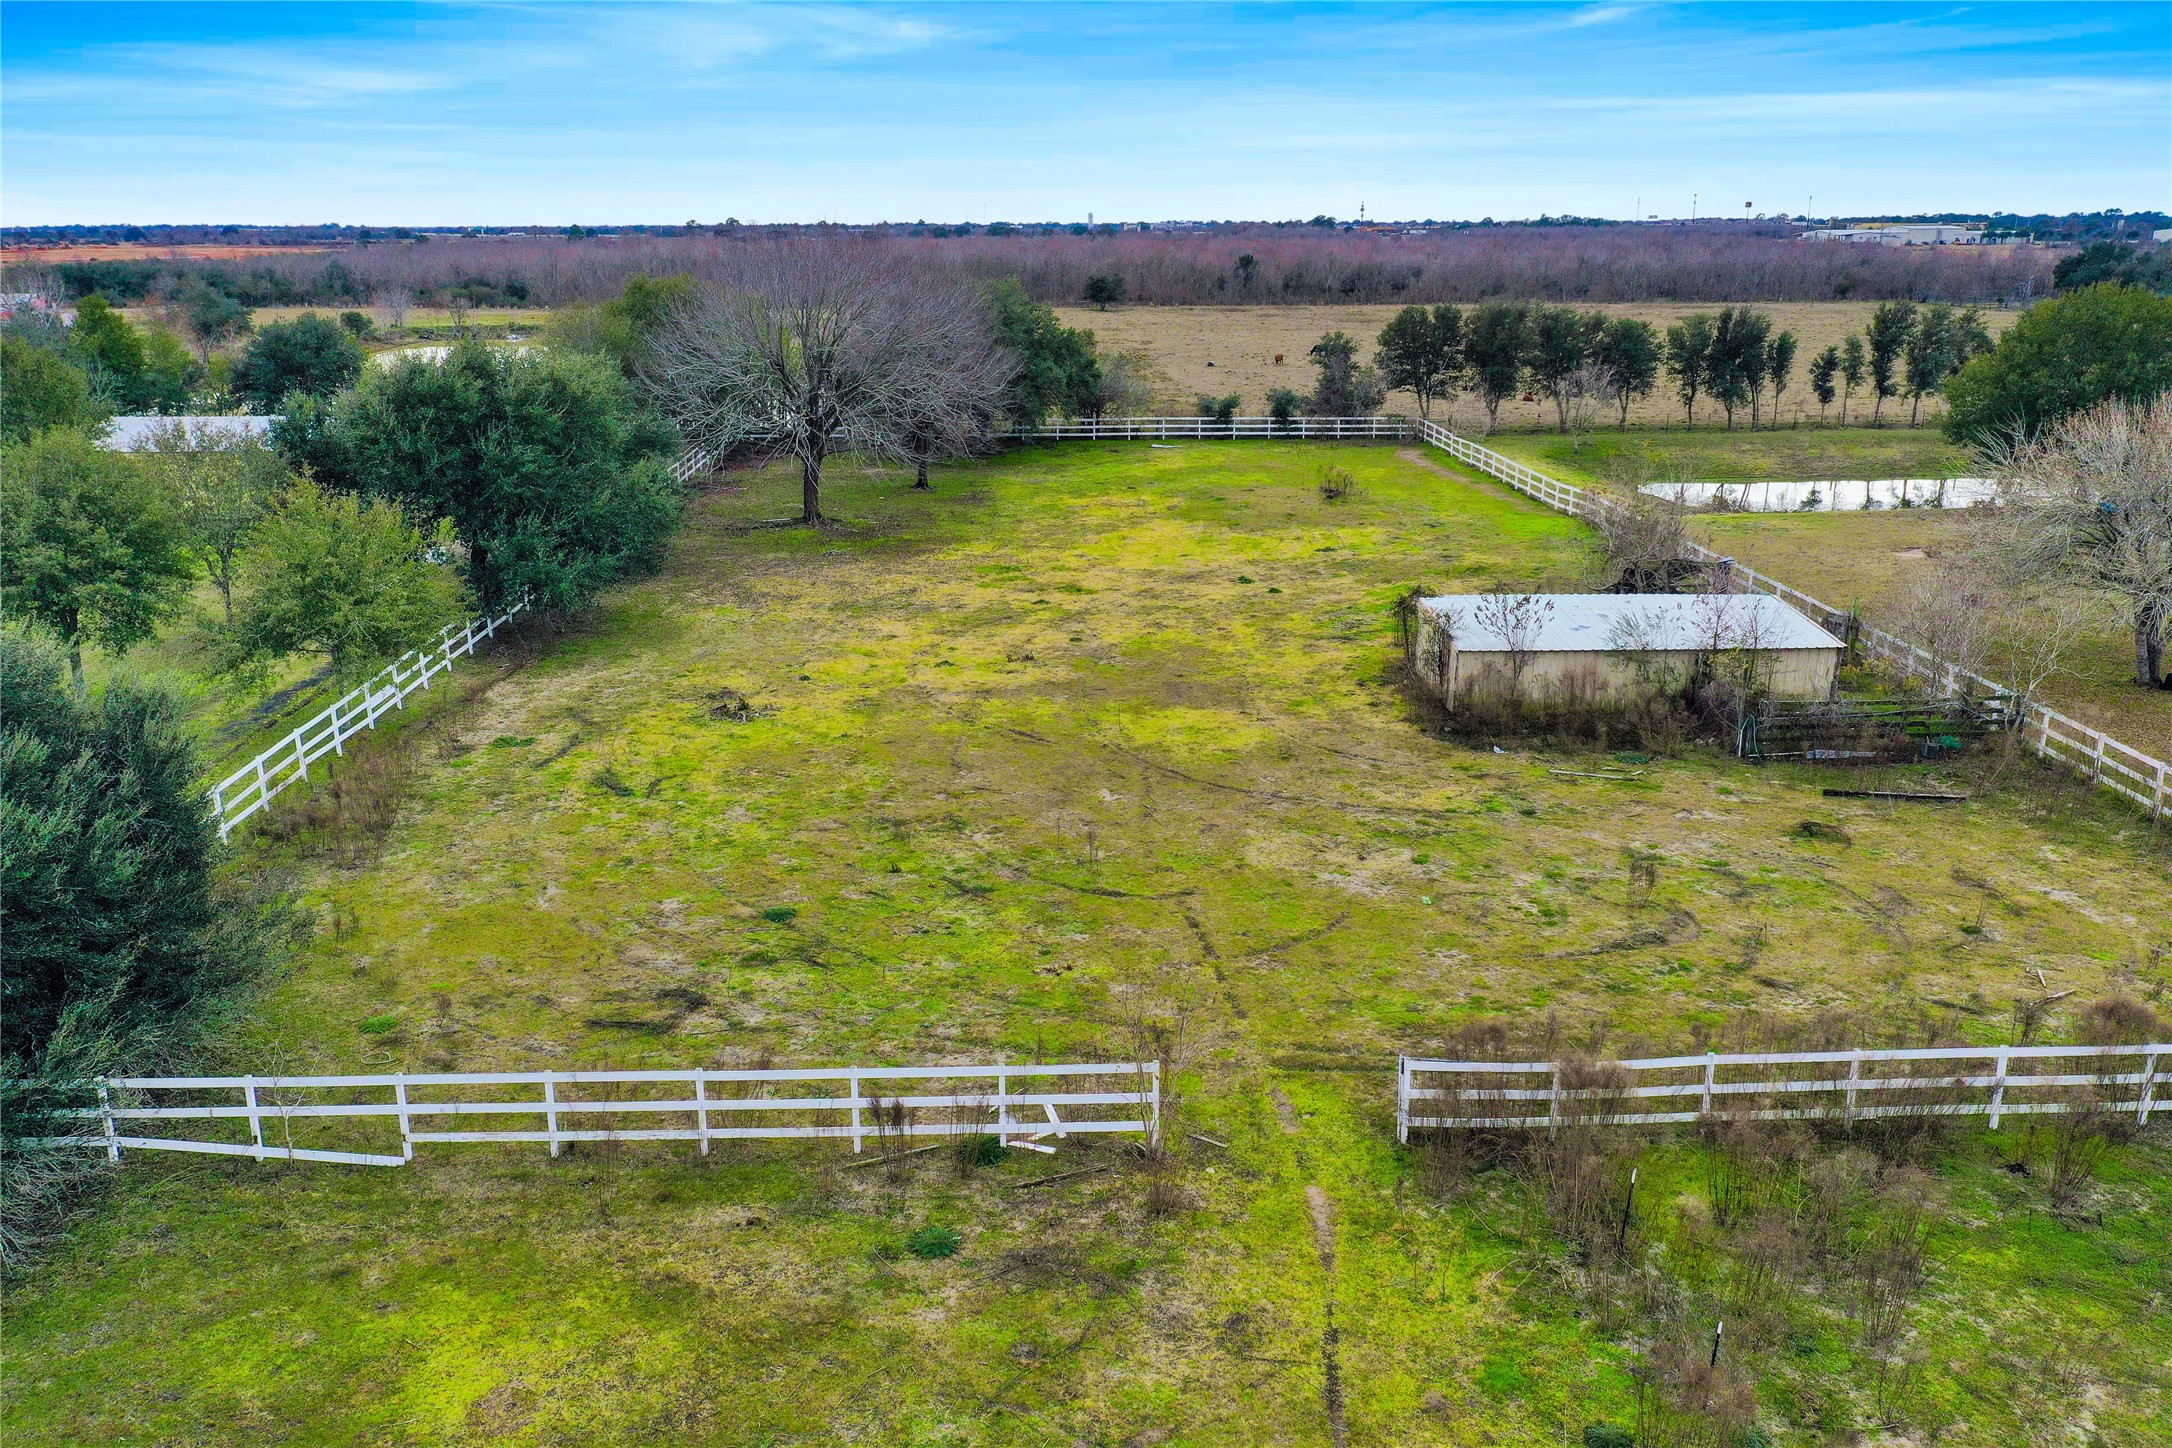 3rd crossed fenced pasture with barn